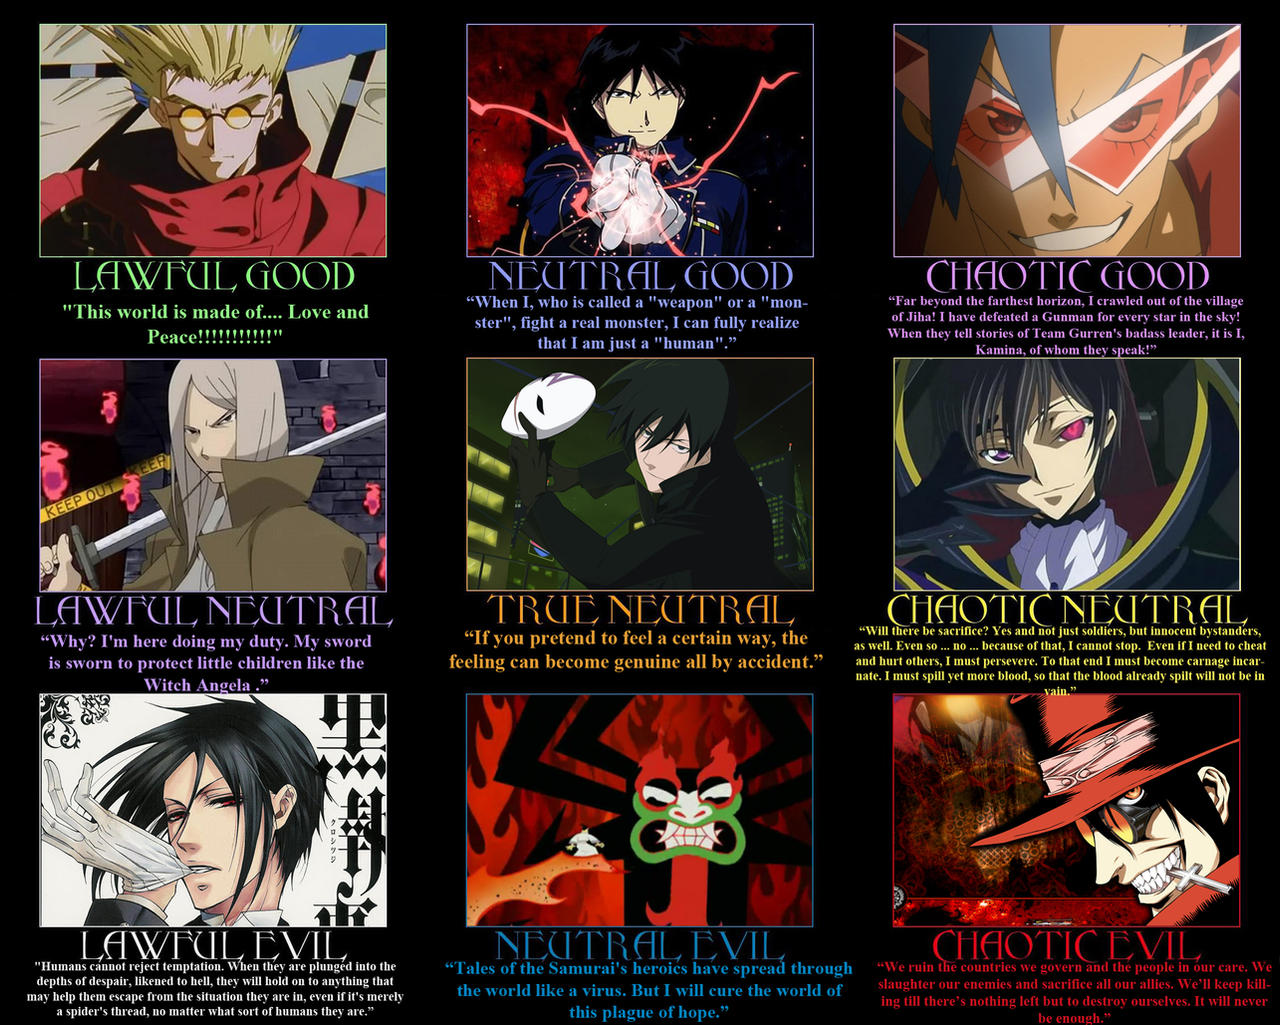 Top 12 Characters from FMA Brotherhood by JJHatter on DeviantArt